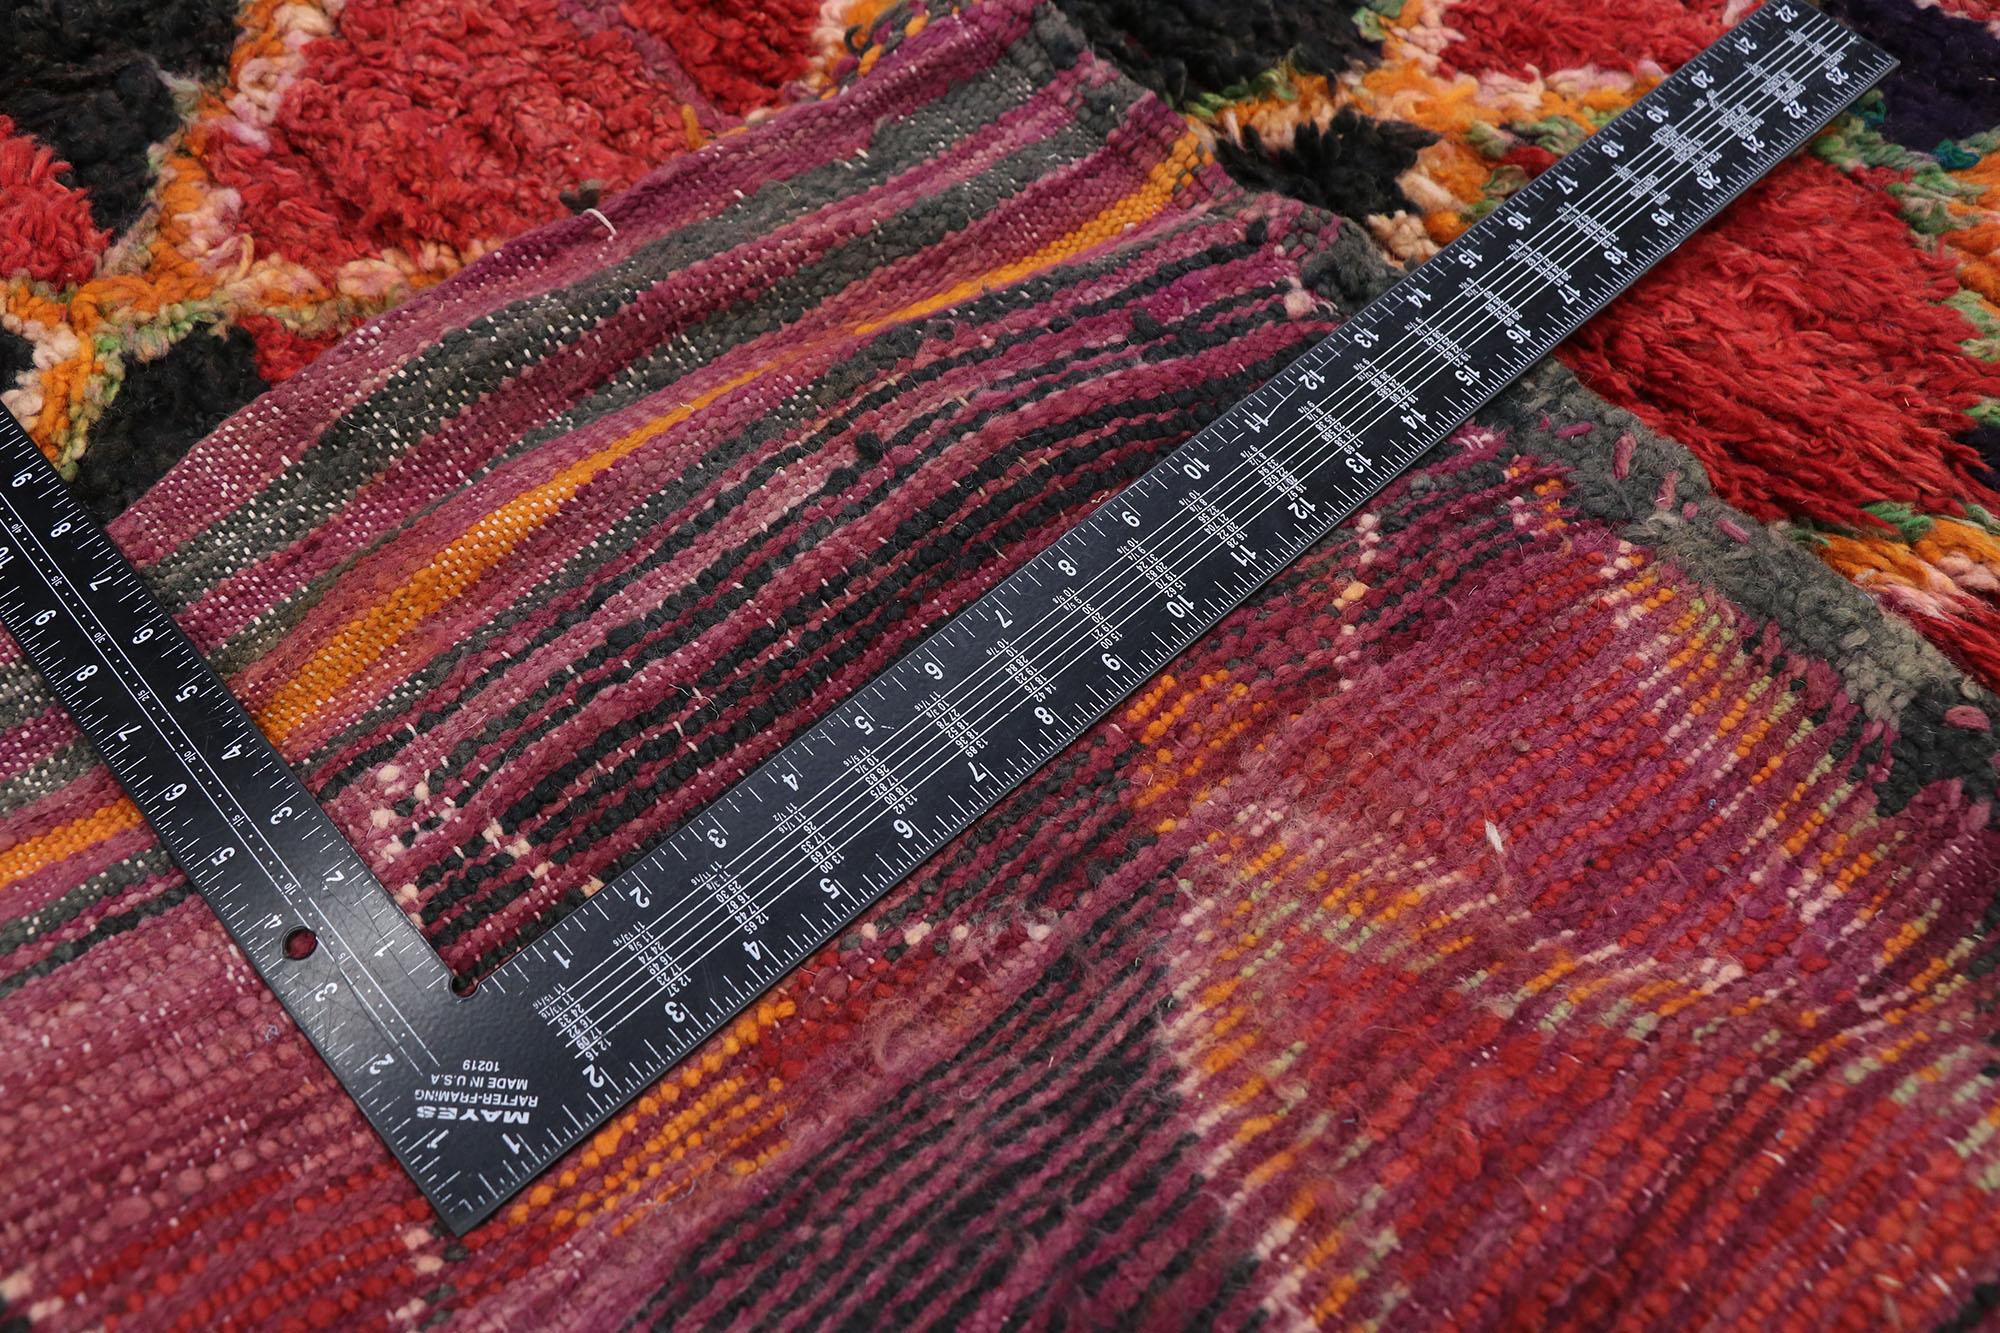 Vintage Berber Moroccan Rug, Colorfully Curated Meets Boho Chic In Good Condition For Sale In Dallas, TX